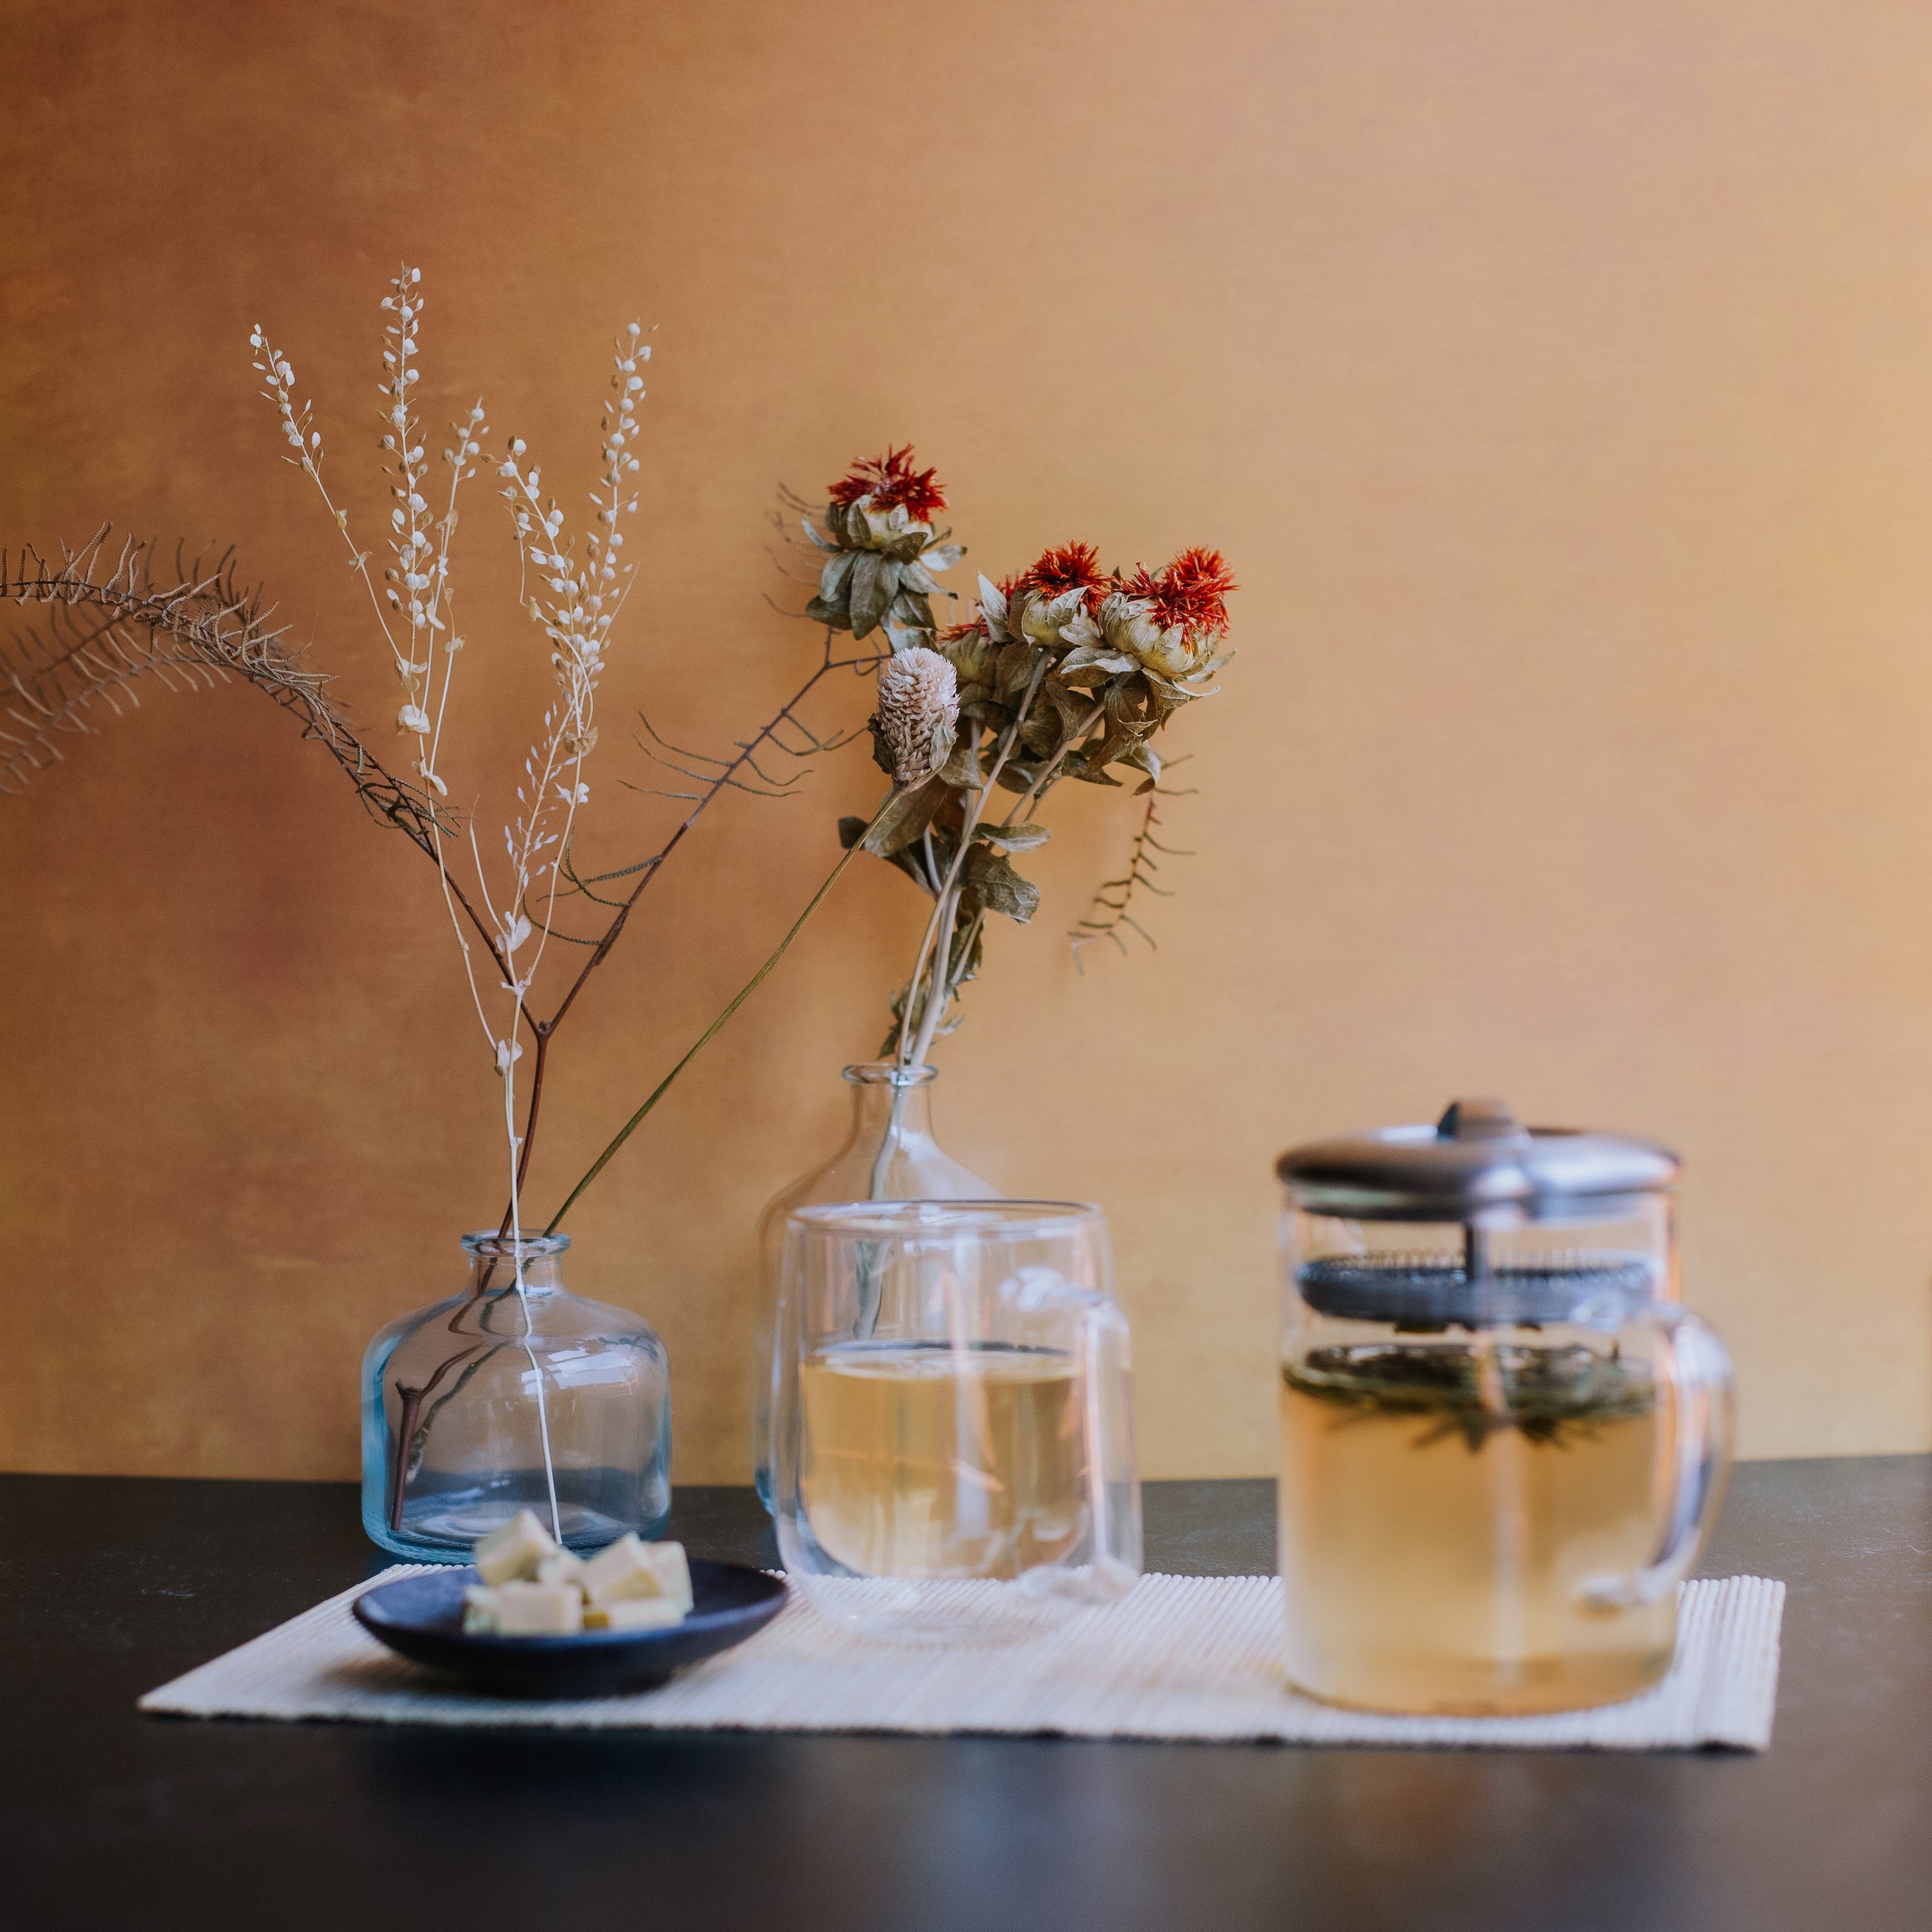 green tea brewing in a glass container with a glass mug of green tea and dish of mung bean cake against a mustard yellow background with dried flowers